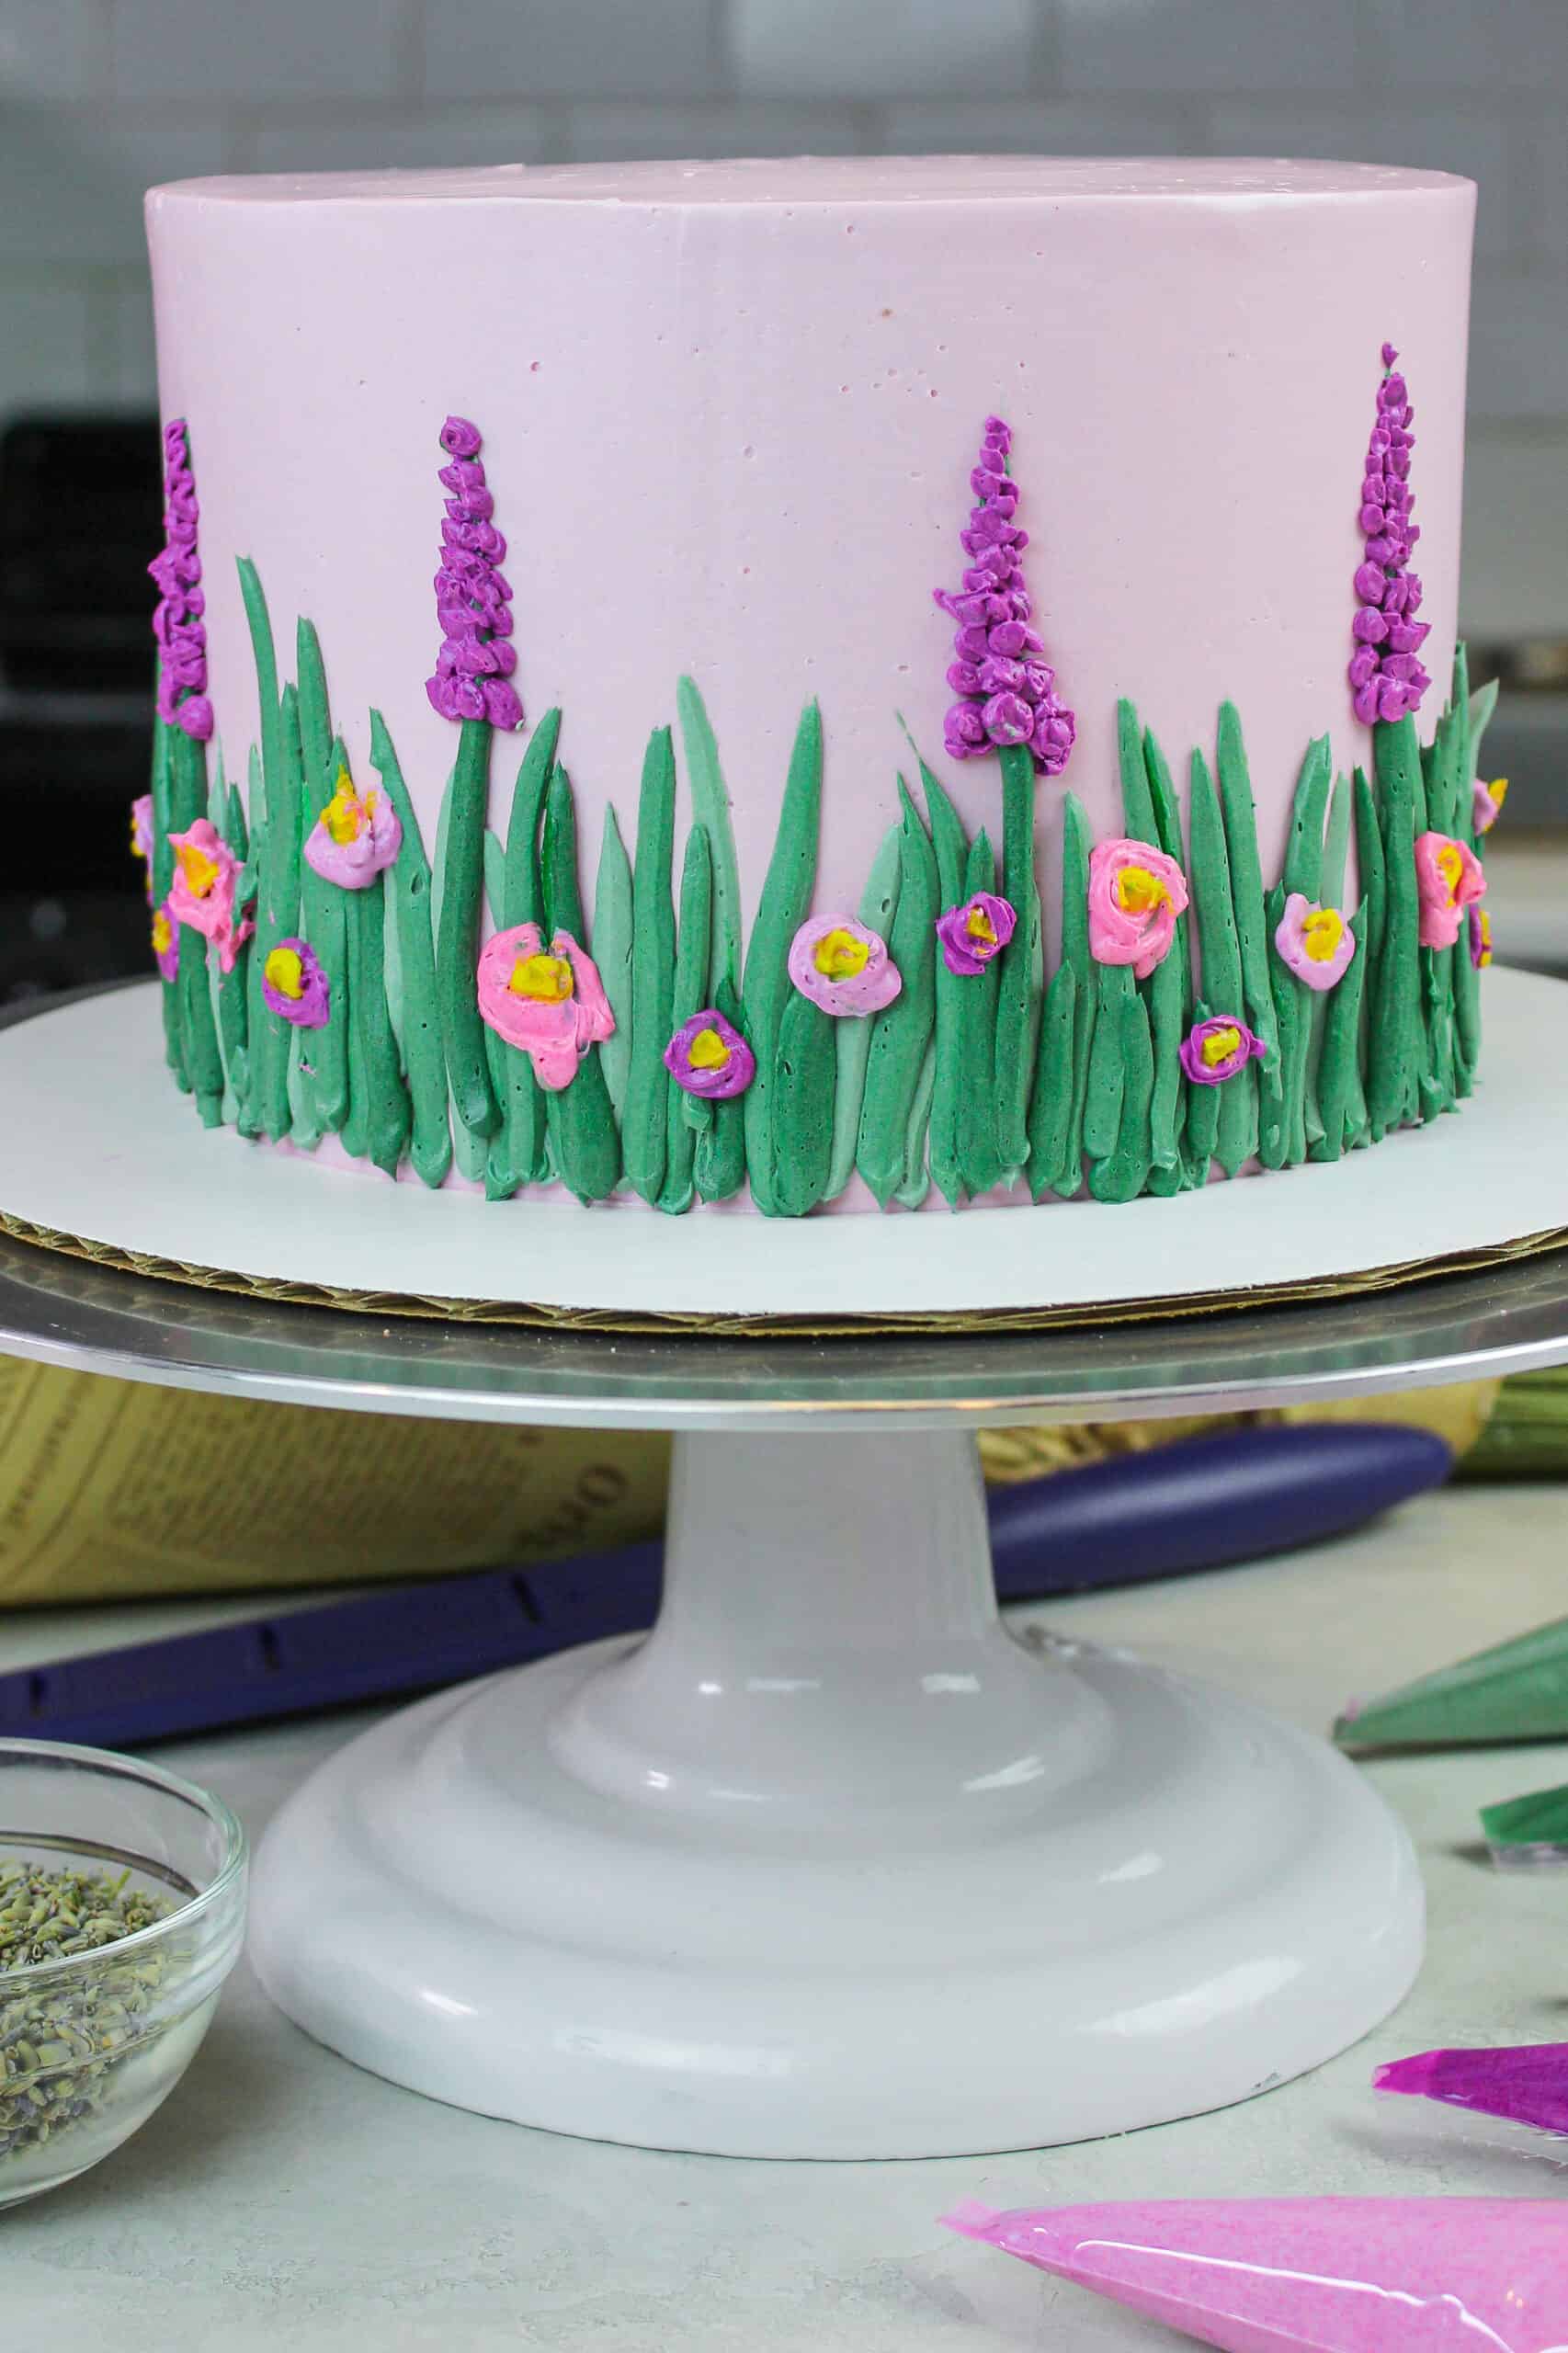 22 Spring Cakes for Every Spring Occasion - Broma Bakery